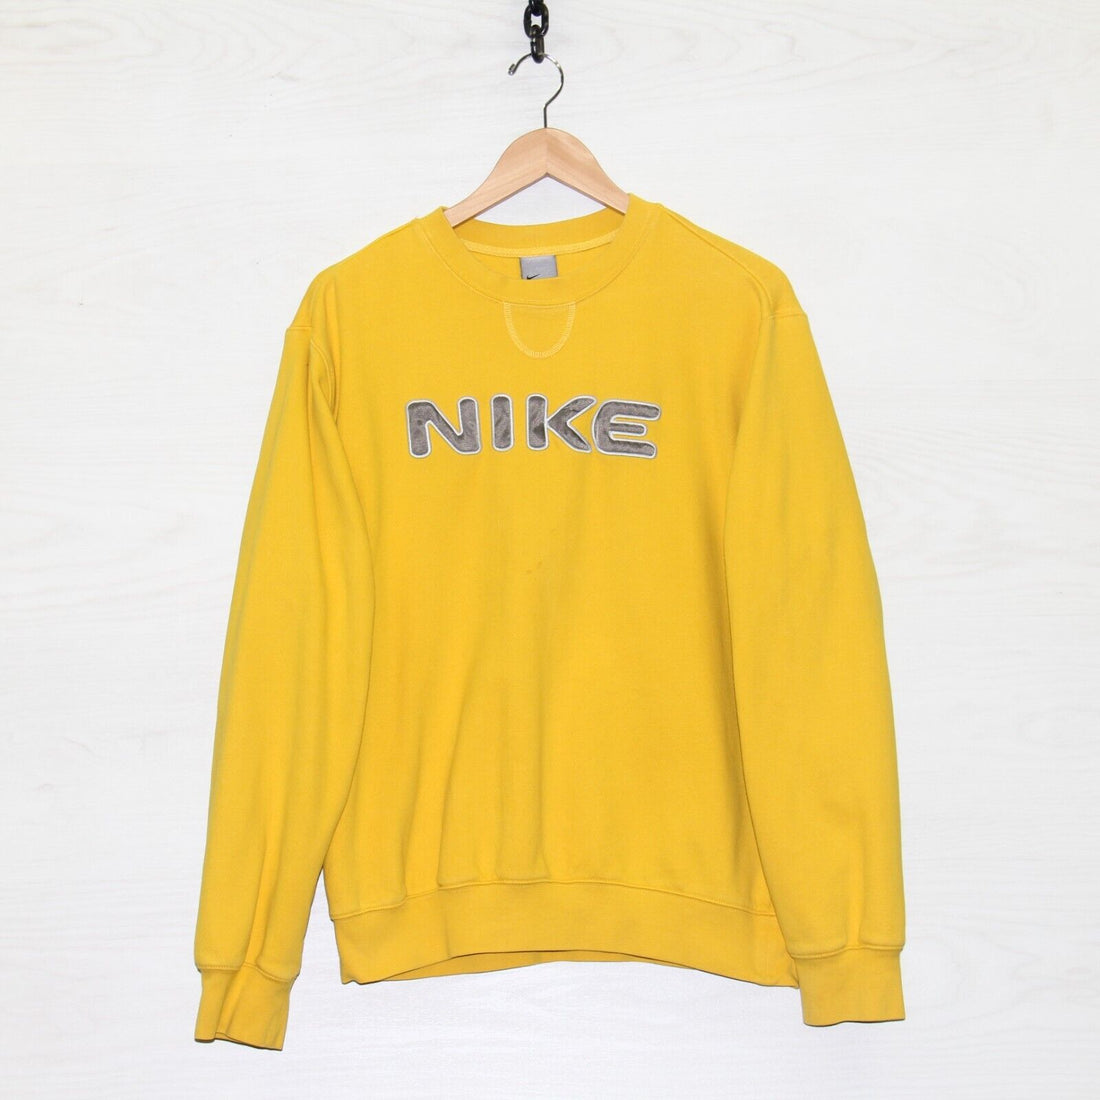 Vintage Nike Sweatshirt Crewneck Size Small Yellow Spell Out